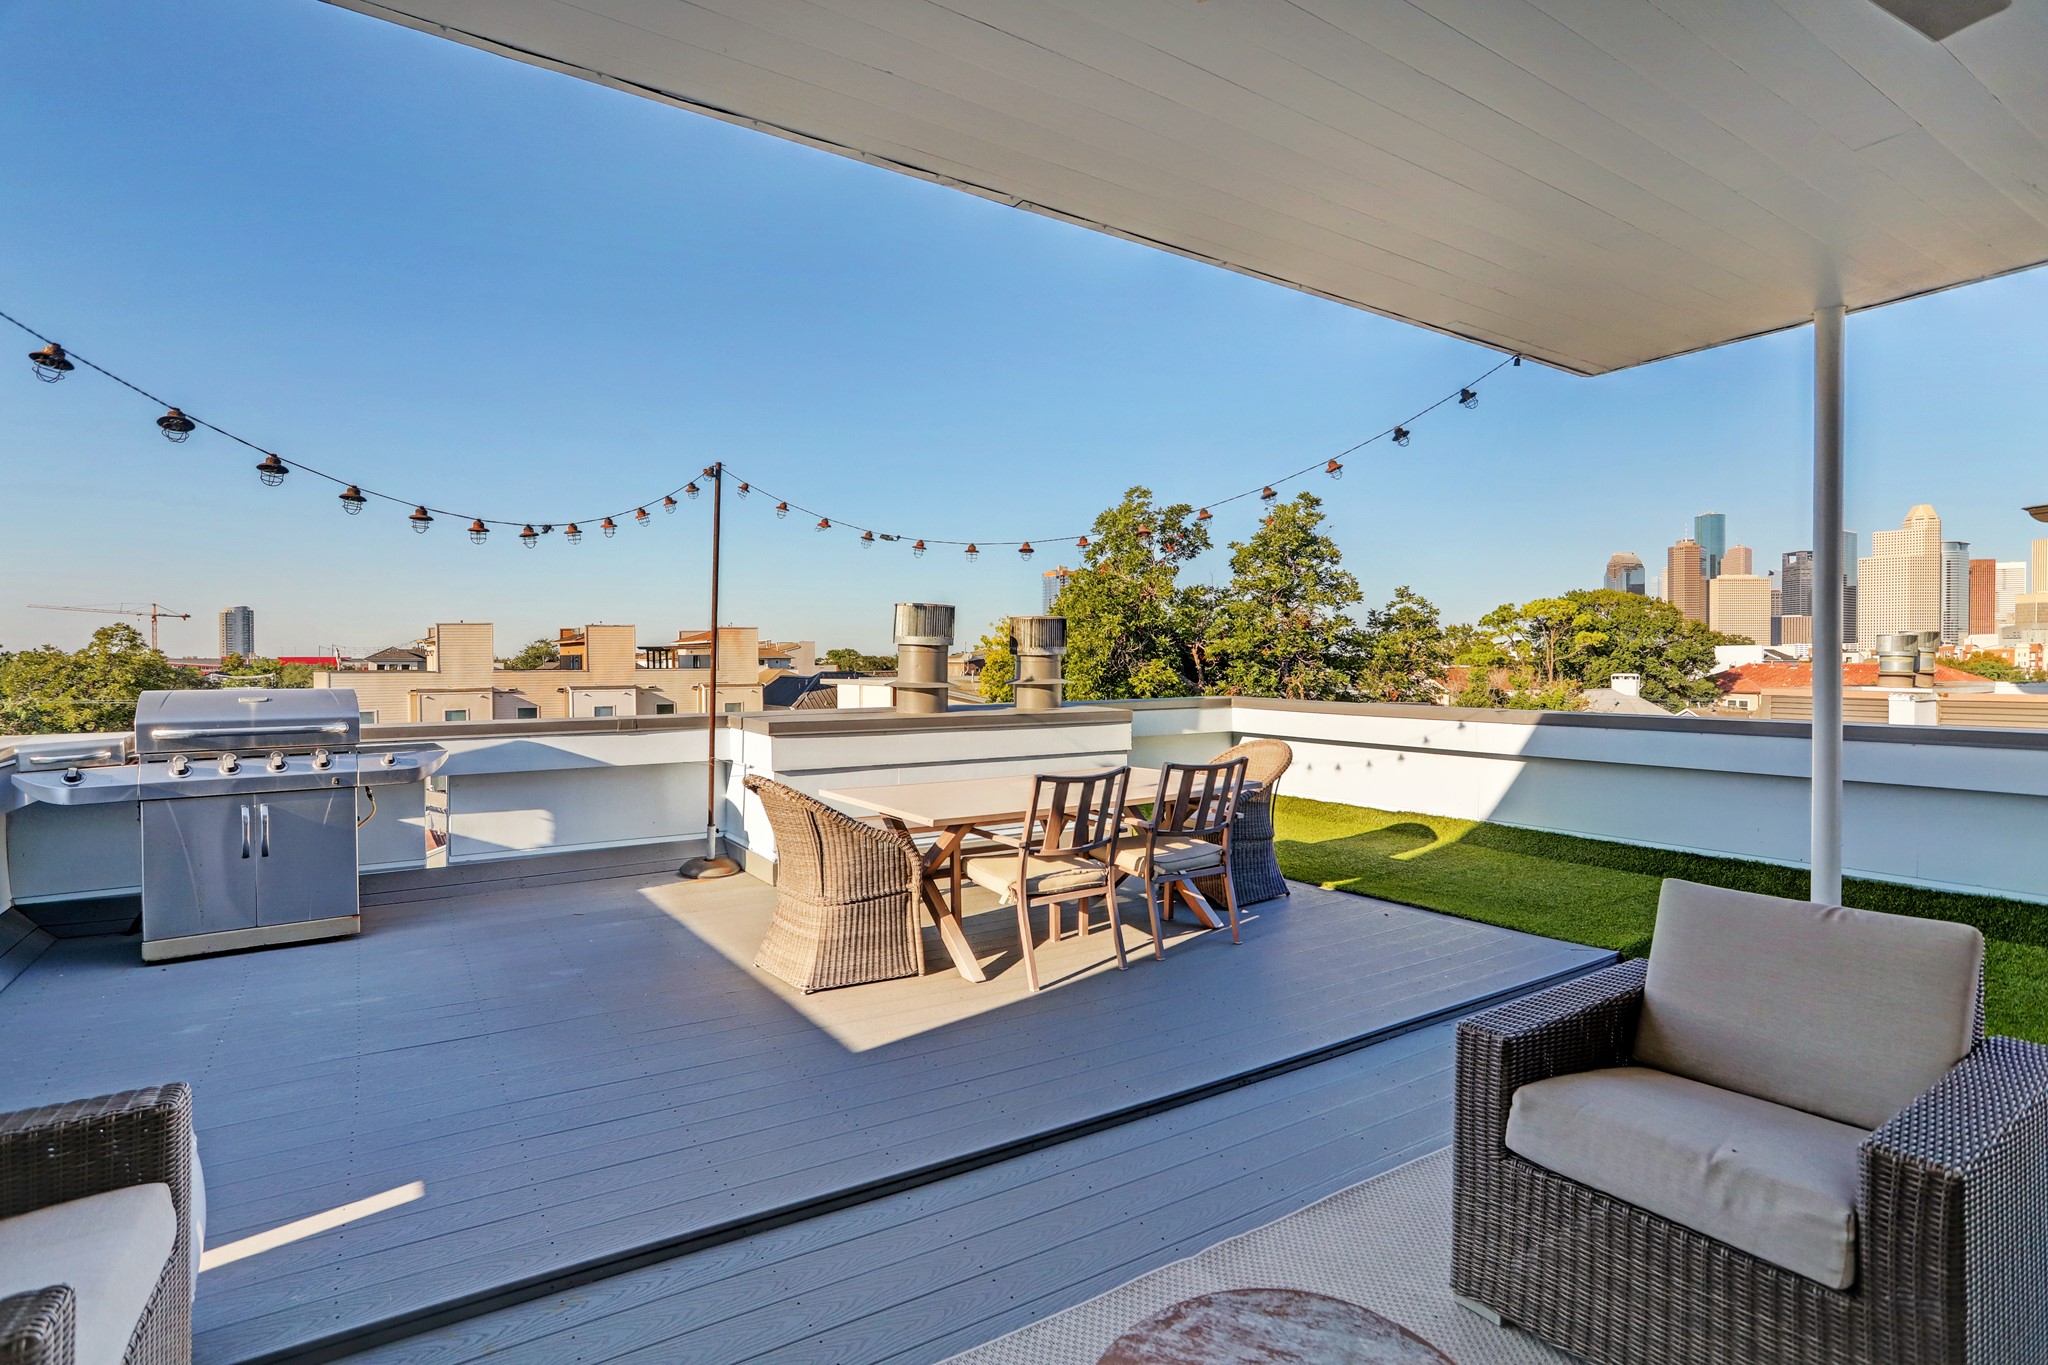 Grill, deck area, and plenty of space to watch fireworks or host a party!